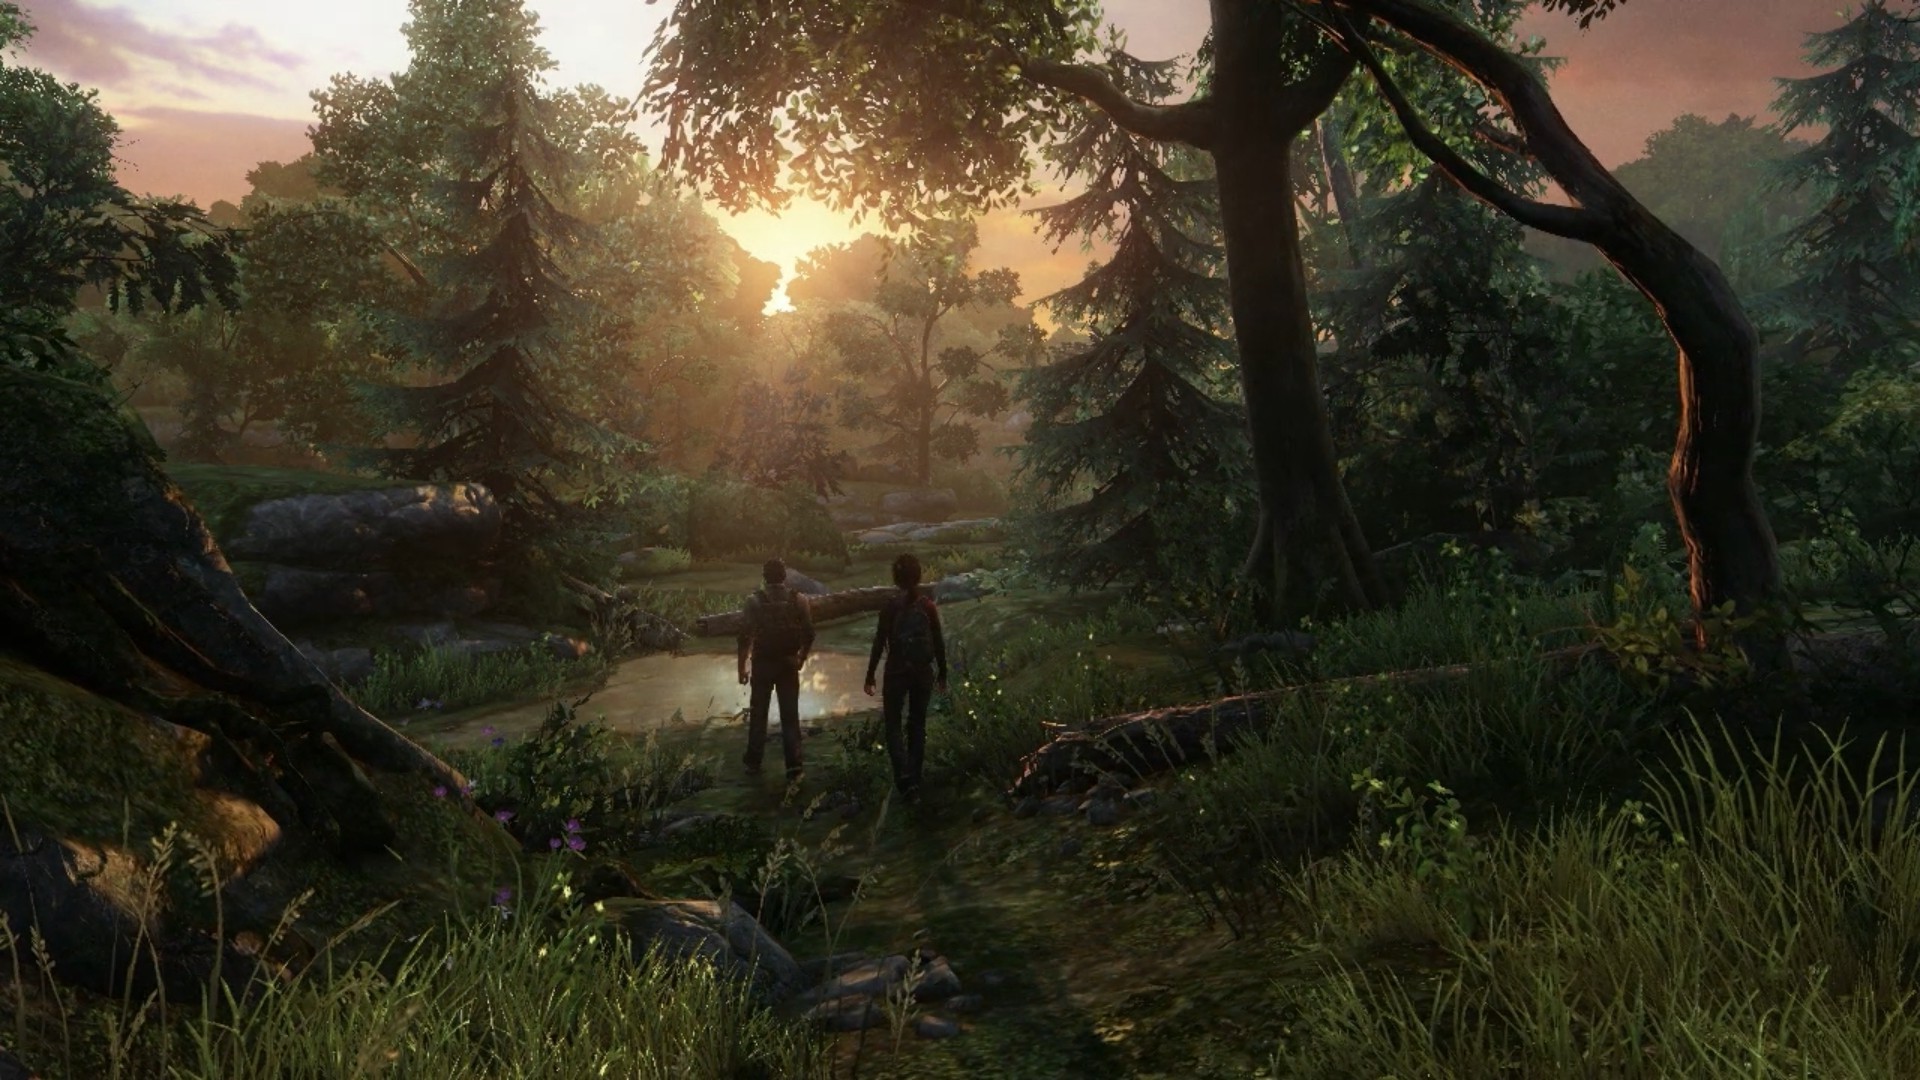 The Last of Us HD Wallpaper HD Wallpapers HD Backgrounds